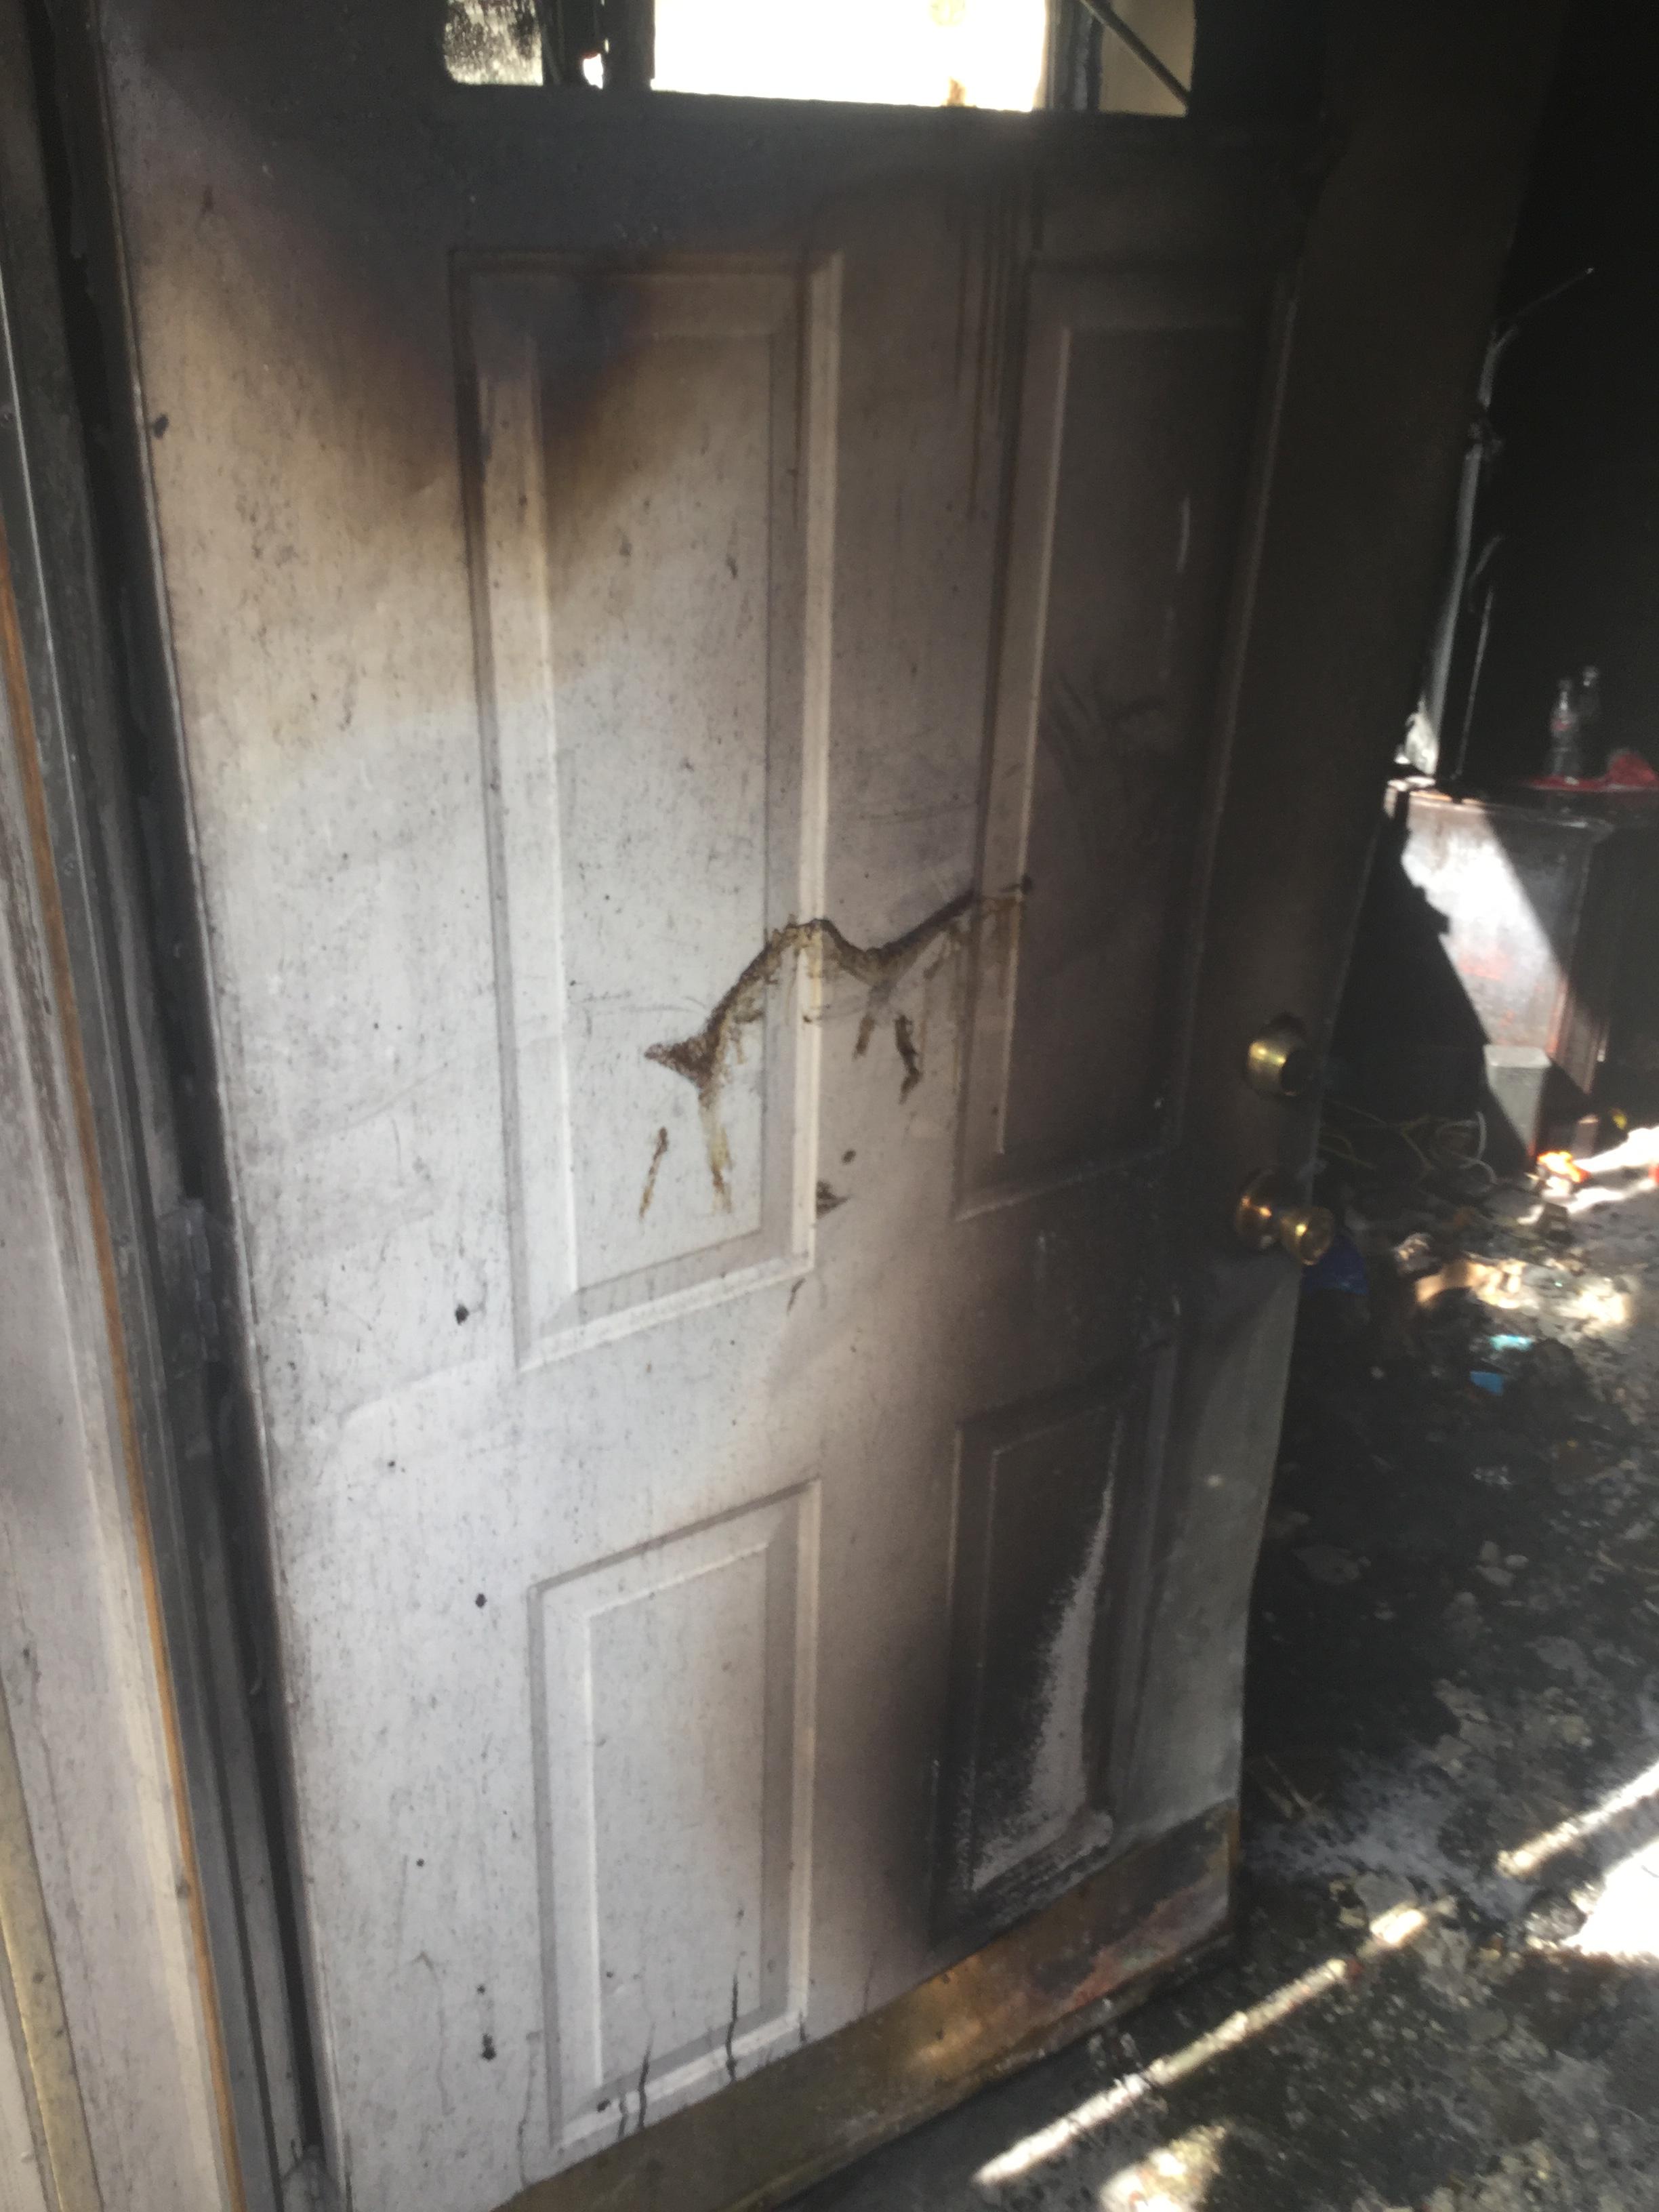 Check out our Fire Damage Tips!